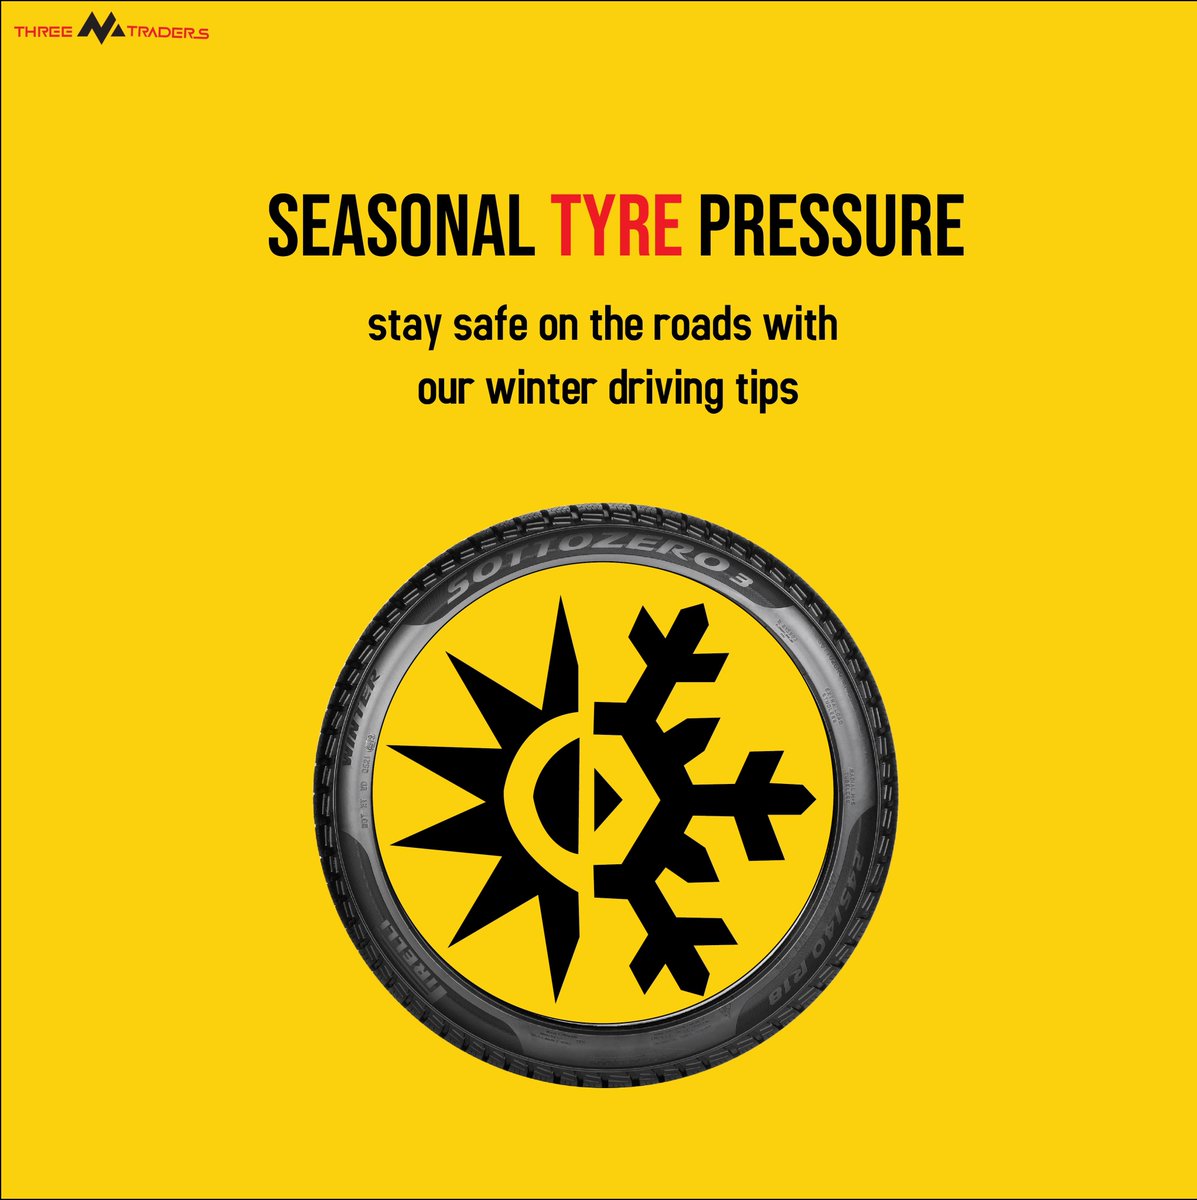 'Stay Safe on the Roads this Winter with our Seasonal Tyre Pressure Tips and Winter Driving Guide'
#winterdriving #tyrepressure #safetyontheroads #drivingtips #coldweather #winterweather #drivinginice #drivinginsnow #drivingskills #safedriving #vehiclesafety #roadconditions